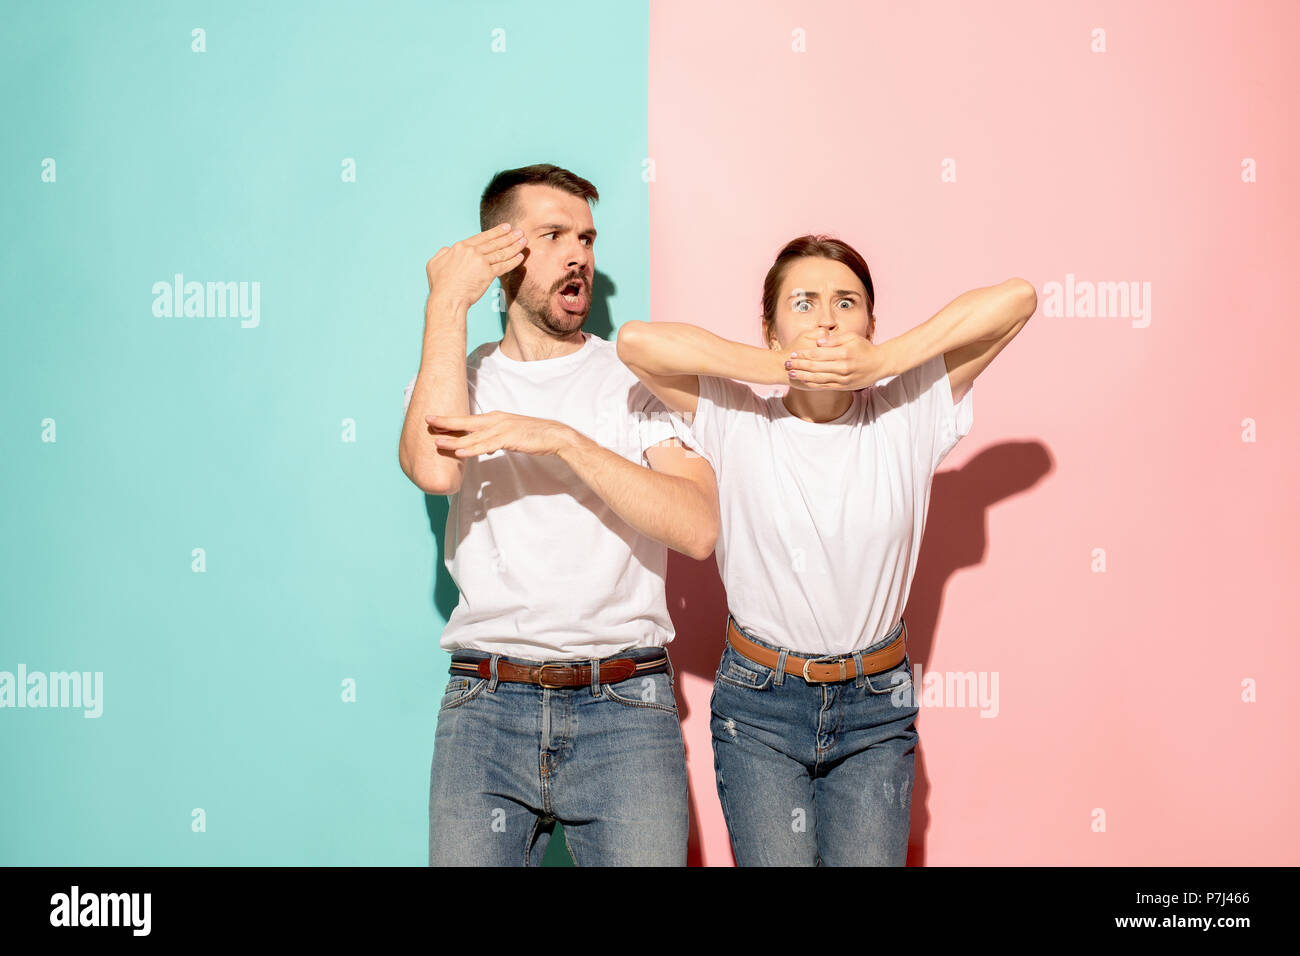 Closeup portrait of young couple, man, woman. TV fan concept on pink and blue background. Emotion contrasts Stock Photo